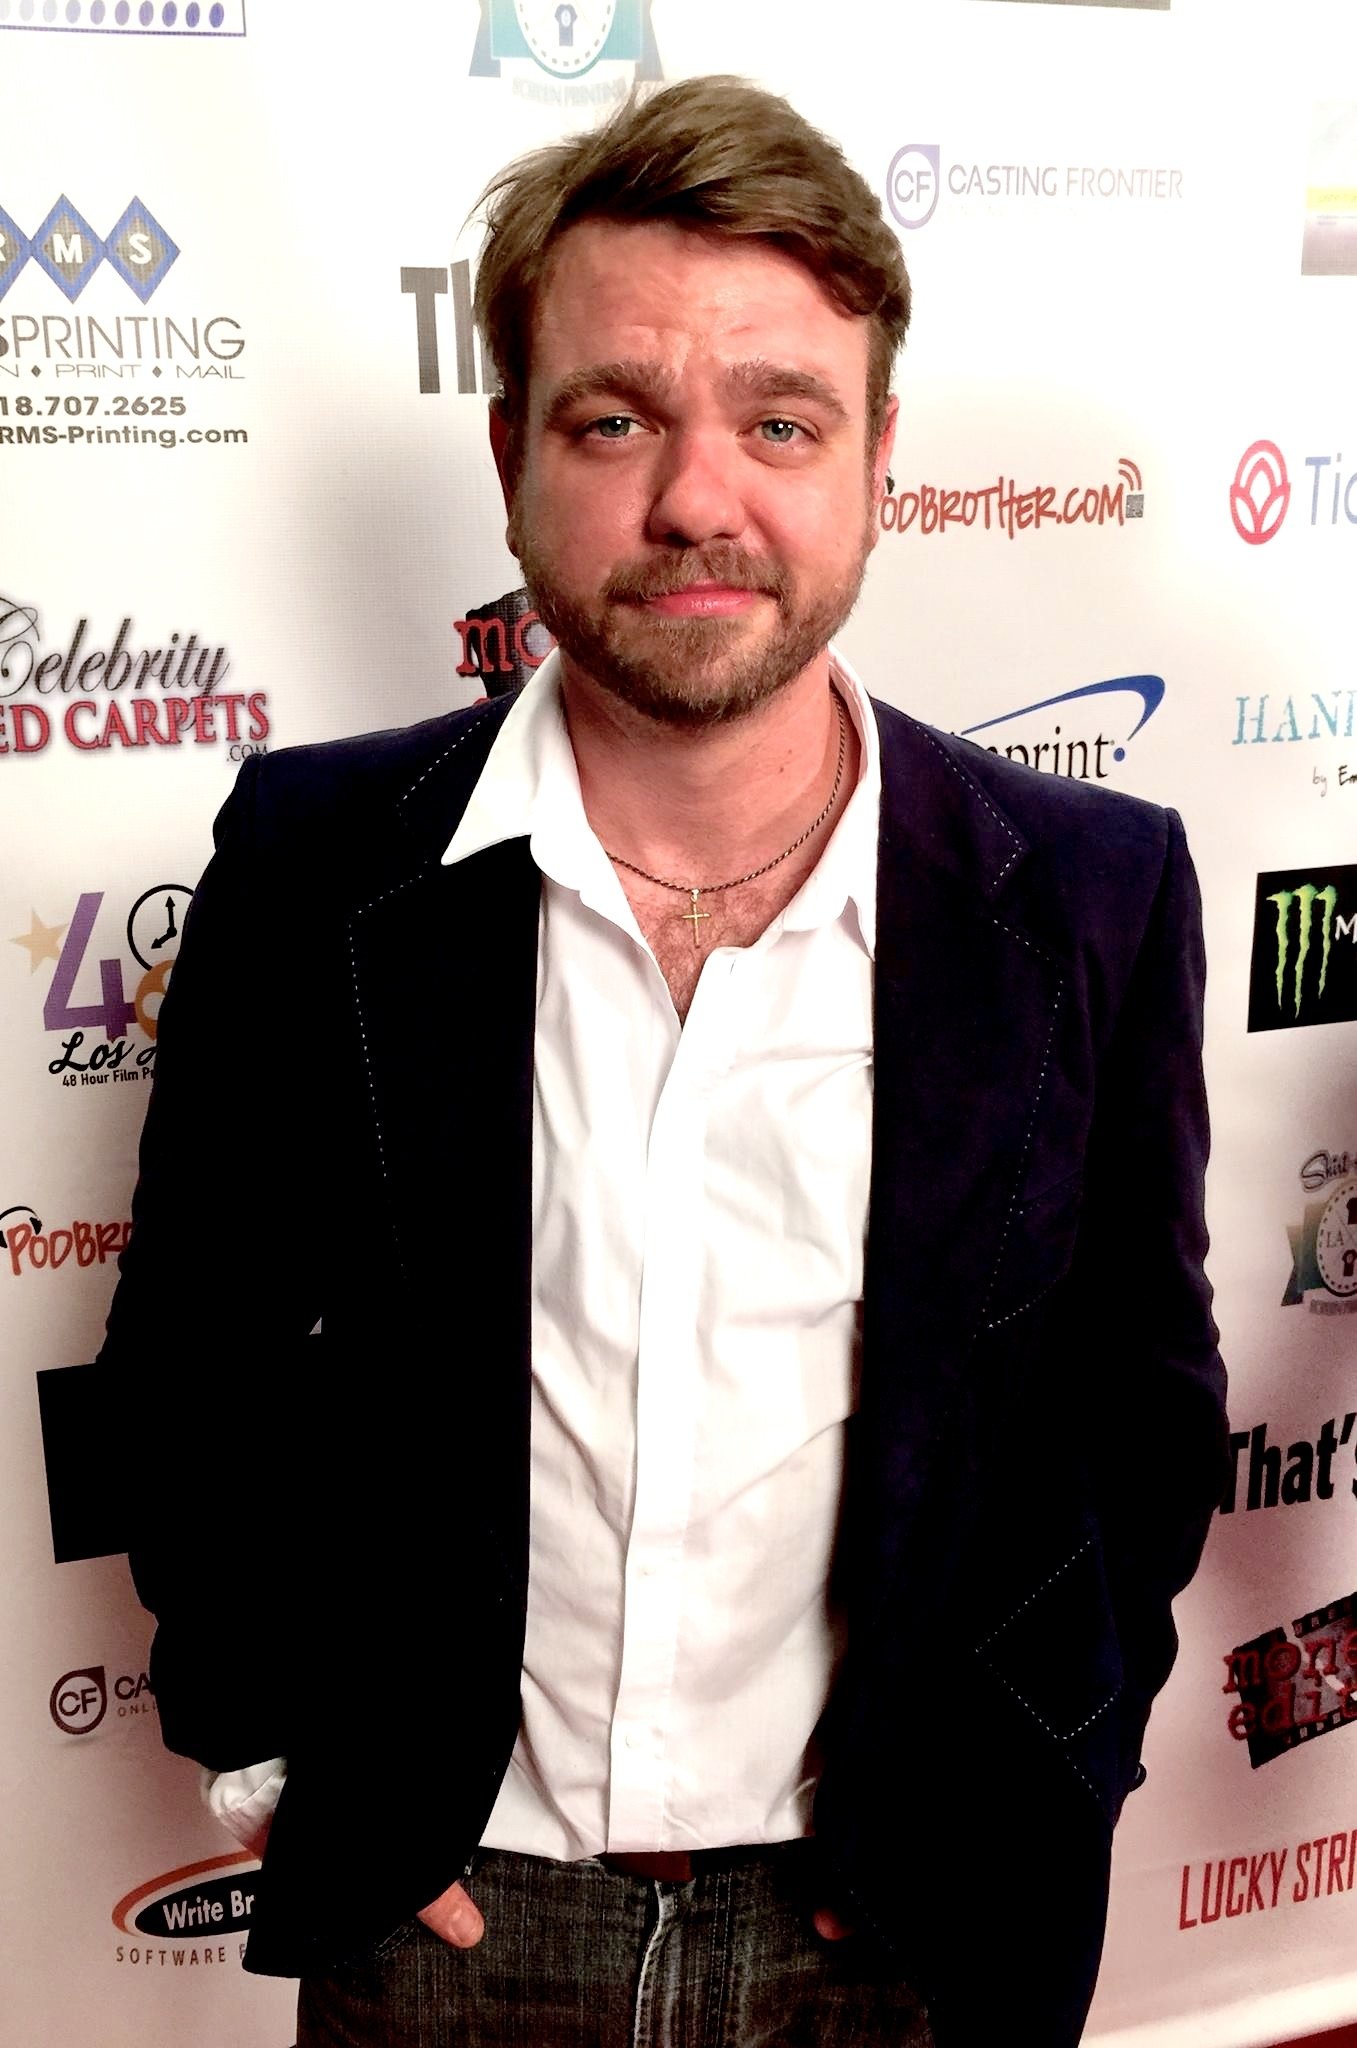 Actor Bryan McKinley on the red carpet at the premiere of 